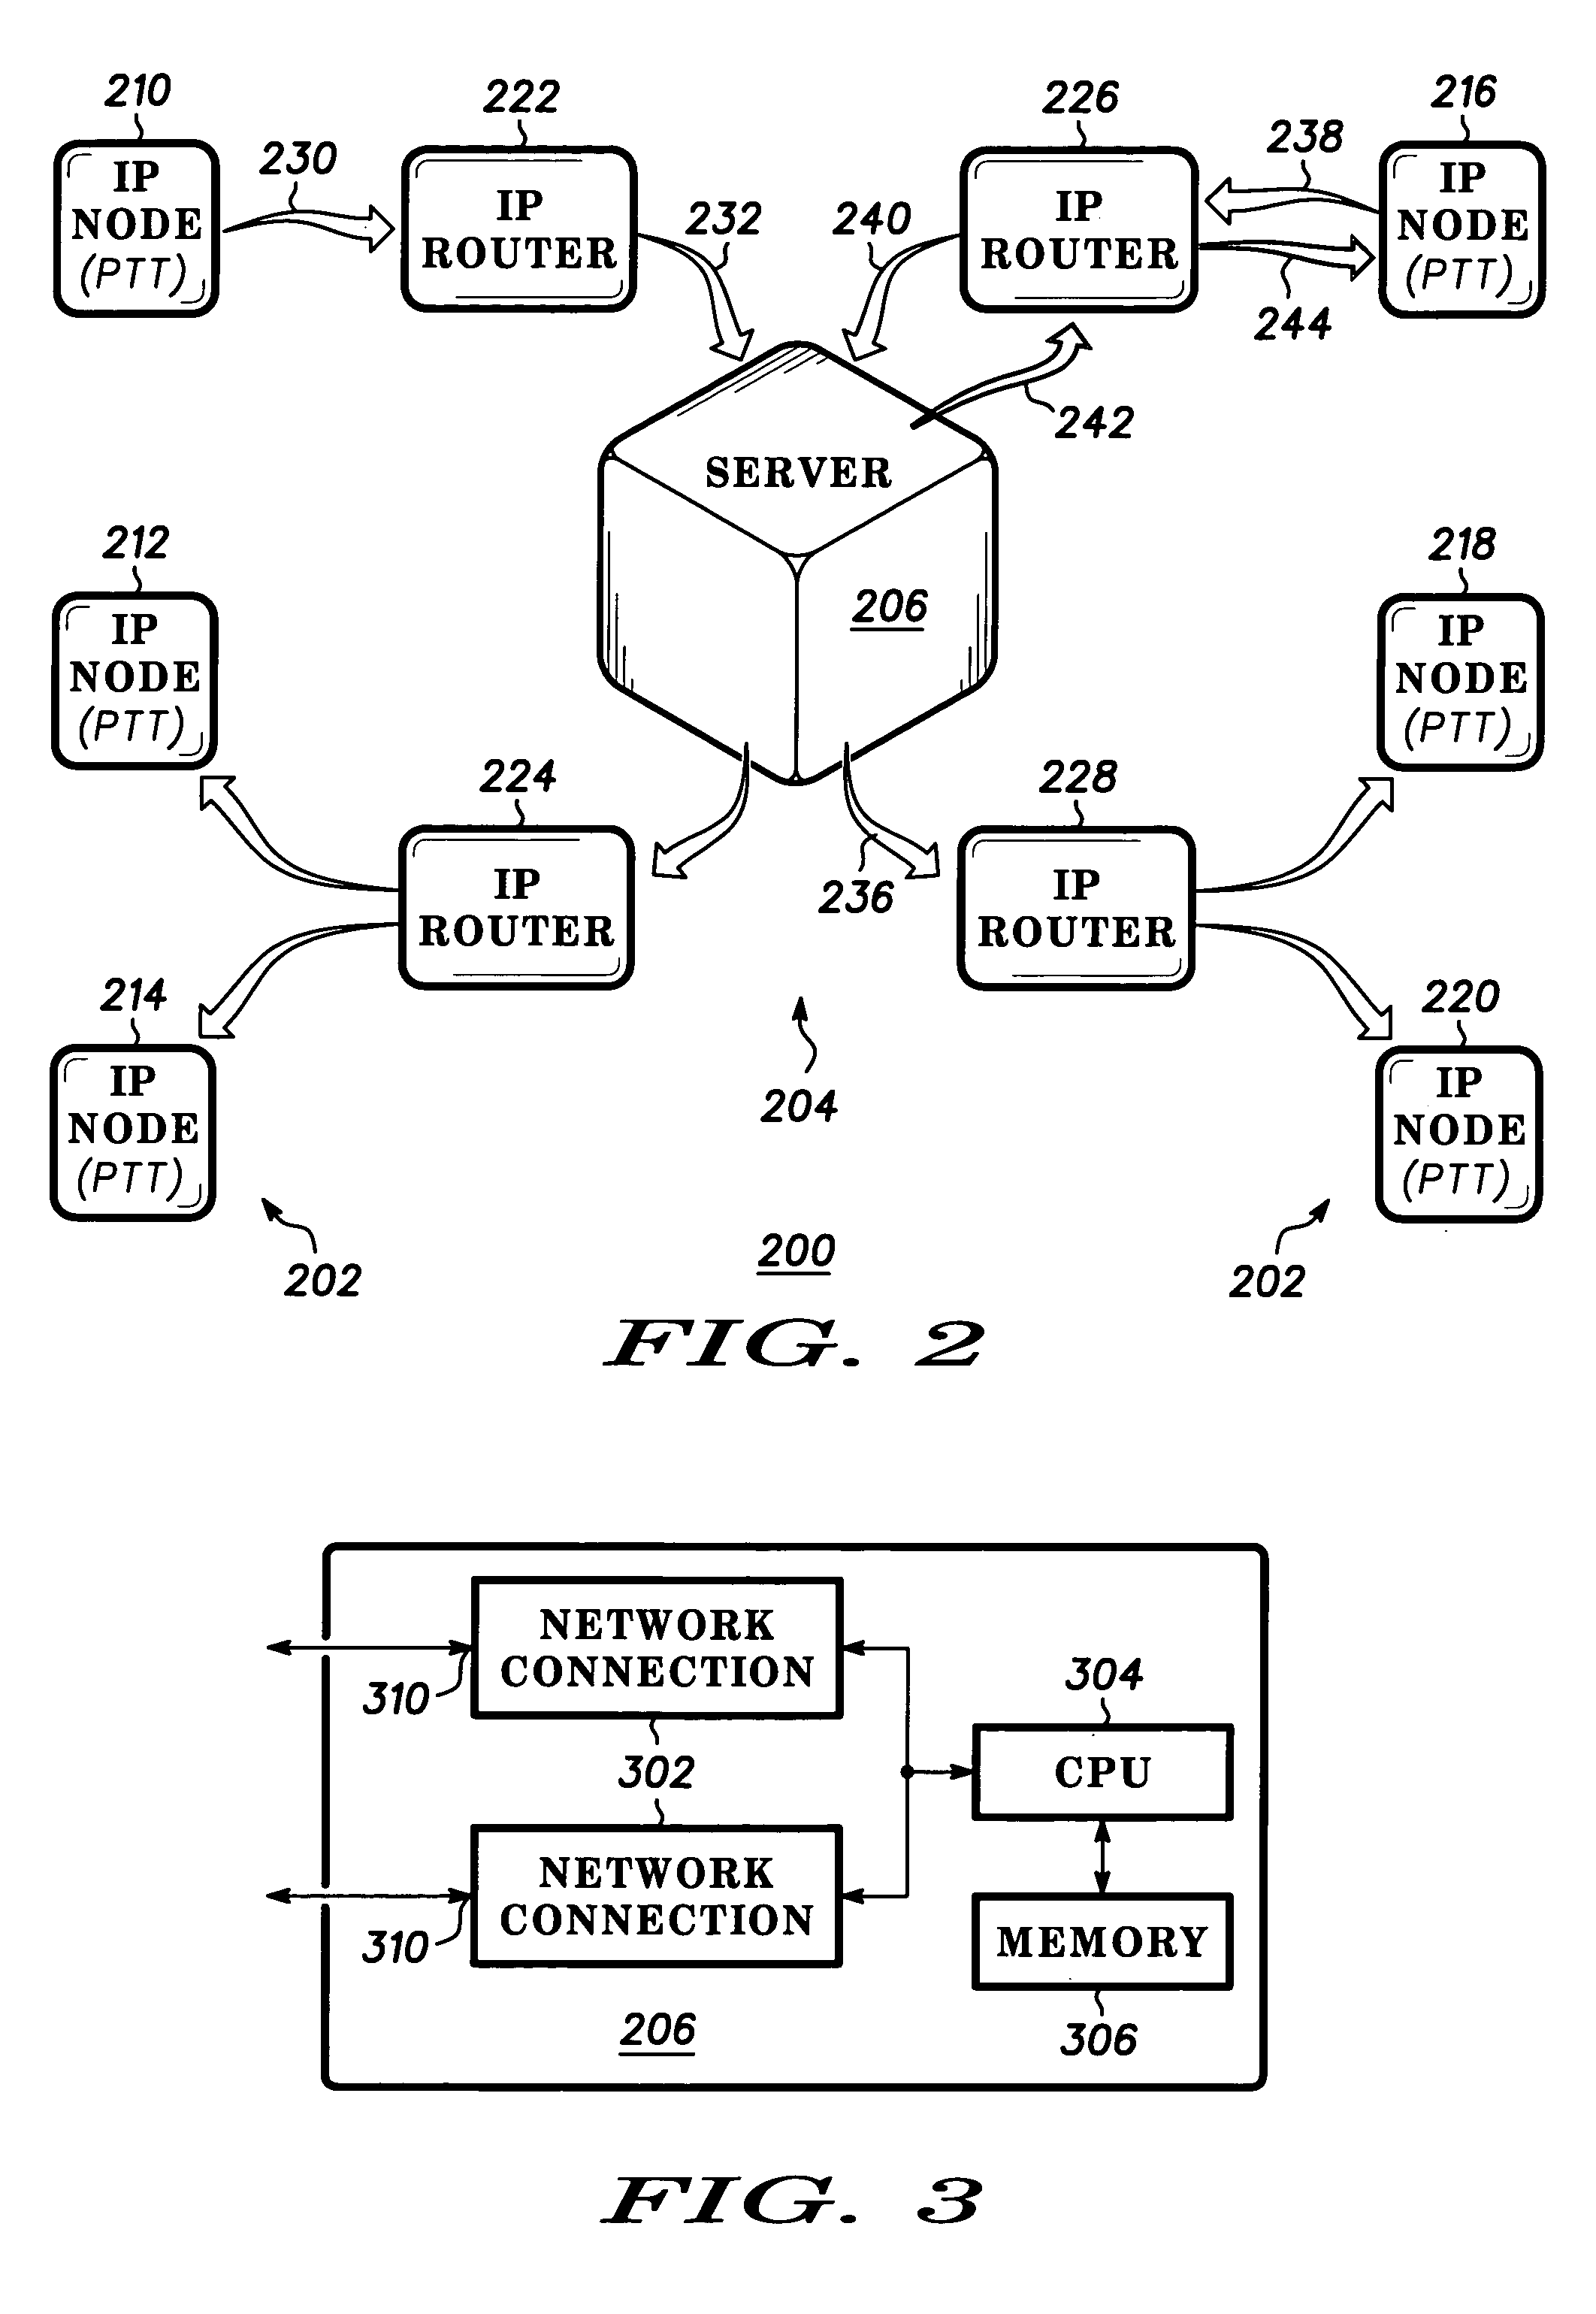 Dispatch call server in a packet based communication network